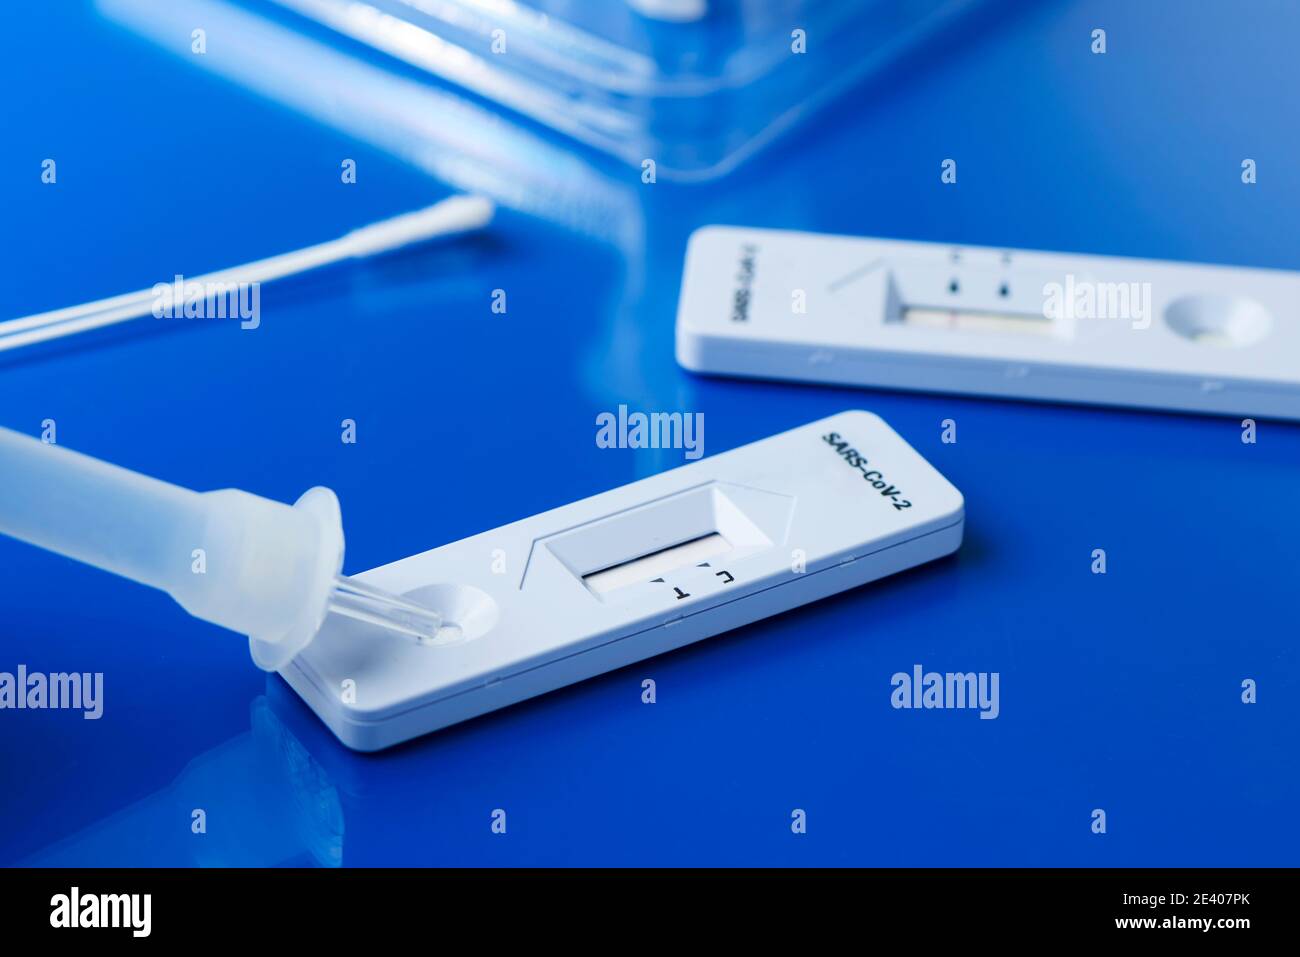 some covid-19 rapid antigen test kits, with the diagnostic test devices and some nasopharyngeal swabs, on a blue surface Stock Photo